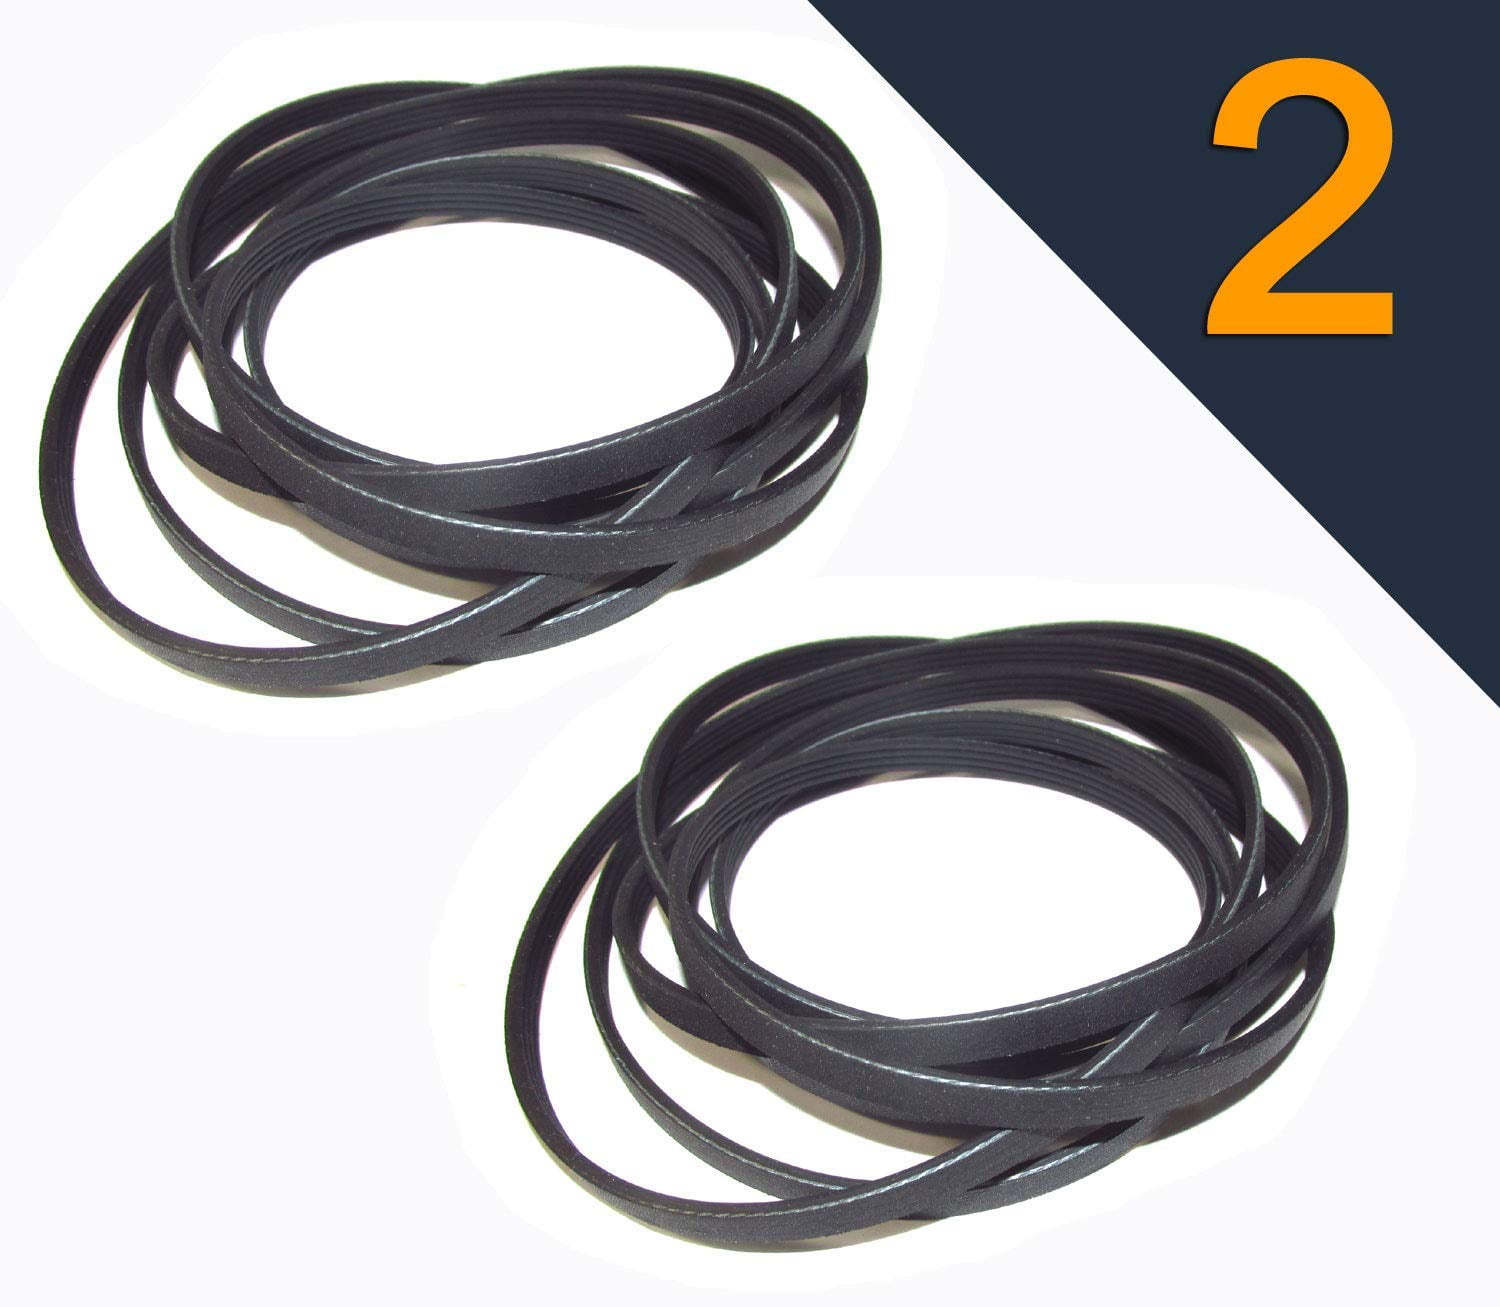 2 PACK PS346995 DRYER BELTS FITS ALL BRANDS 